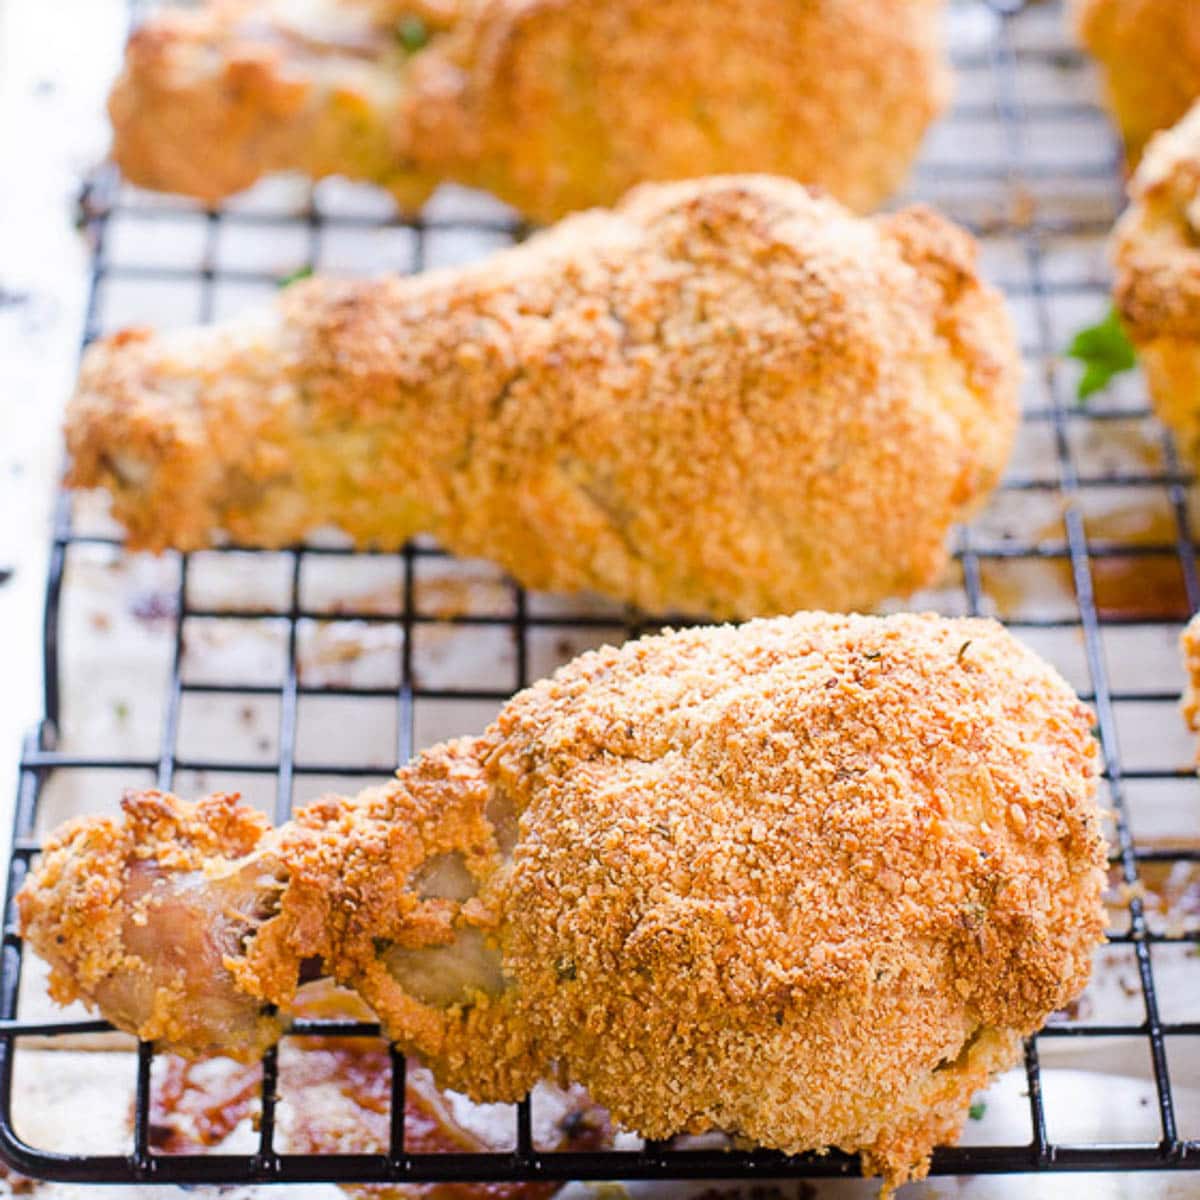 https://ifoodreal.com/wp-content/uploads/2020/11/fg-healthy-fried-chicken.jpg